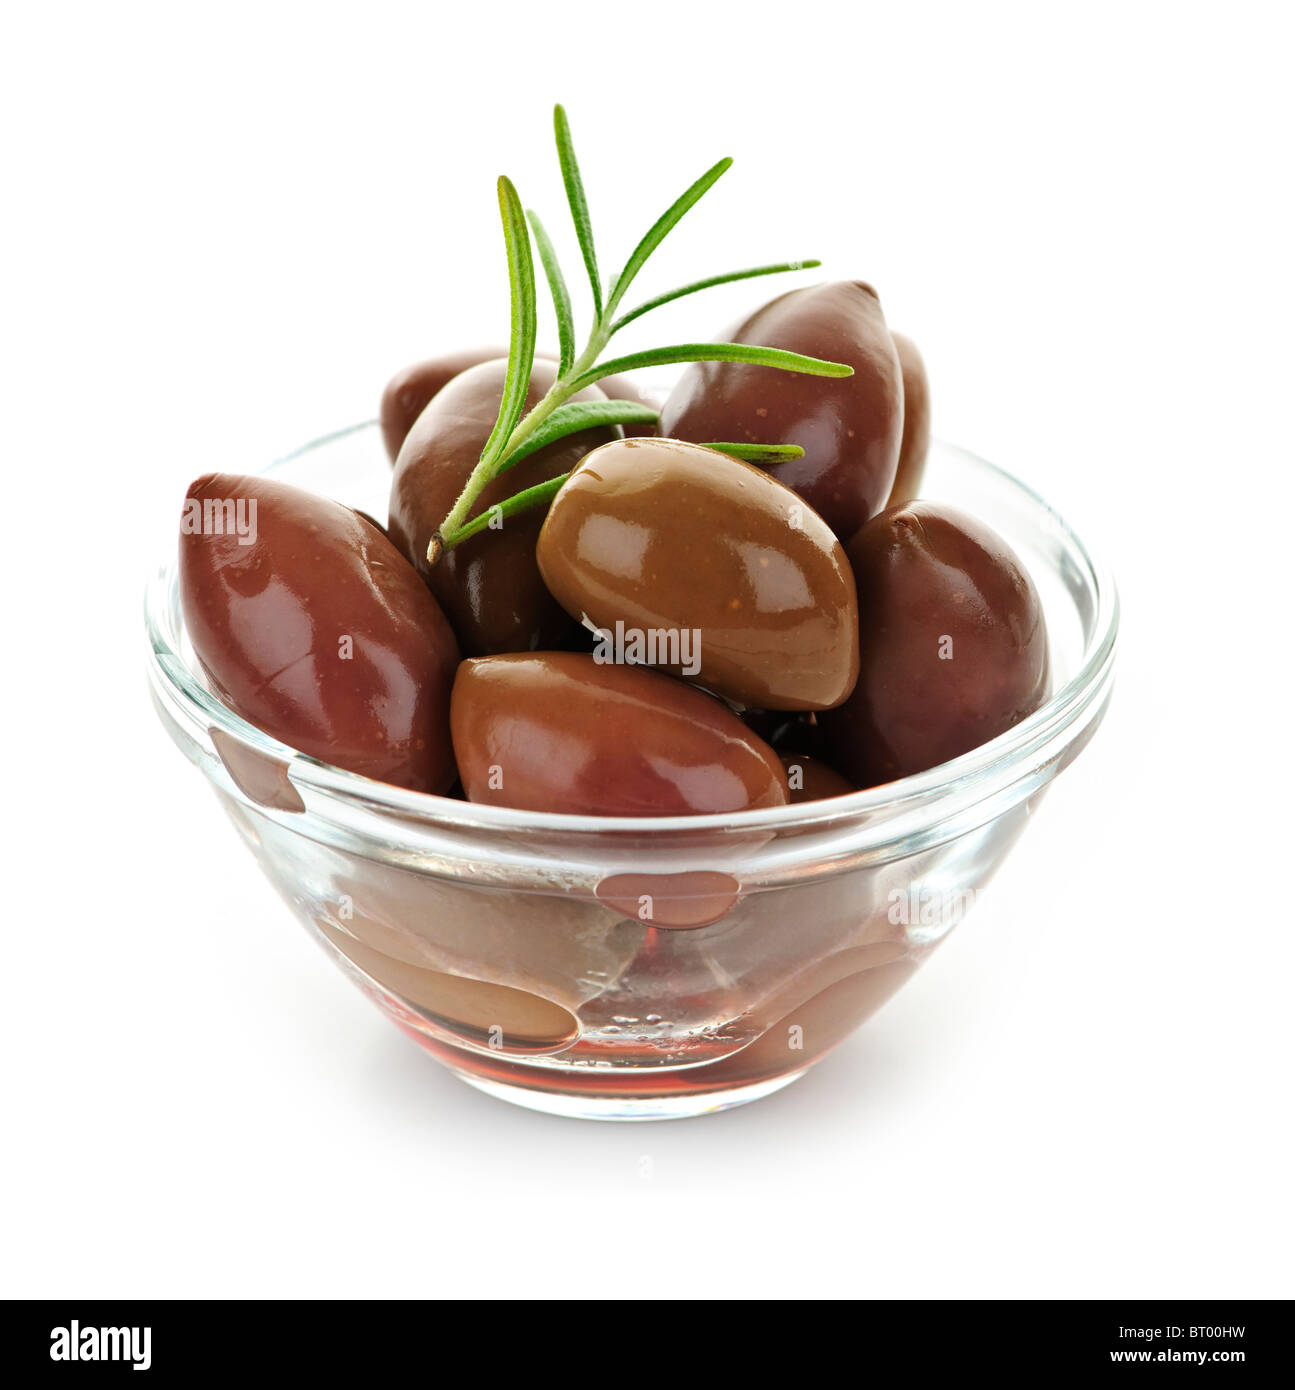 Kalamata olives in olive oil and herbs in bowl Stock Photo